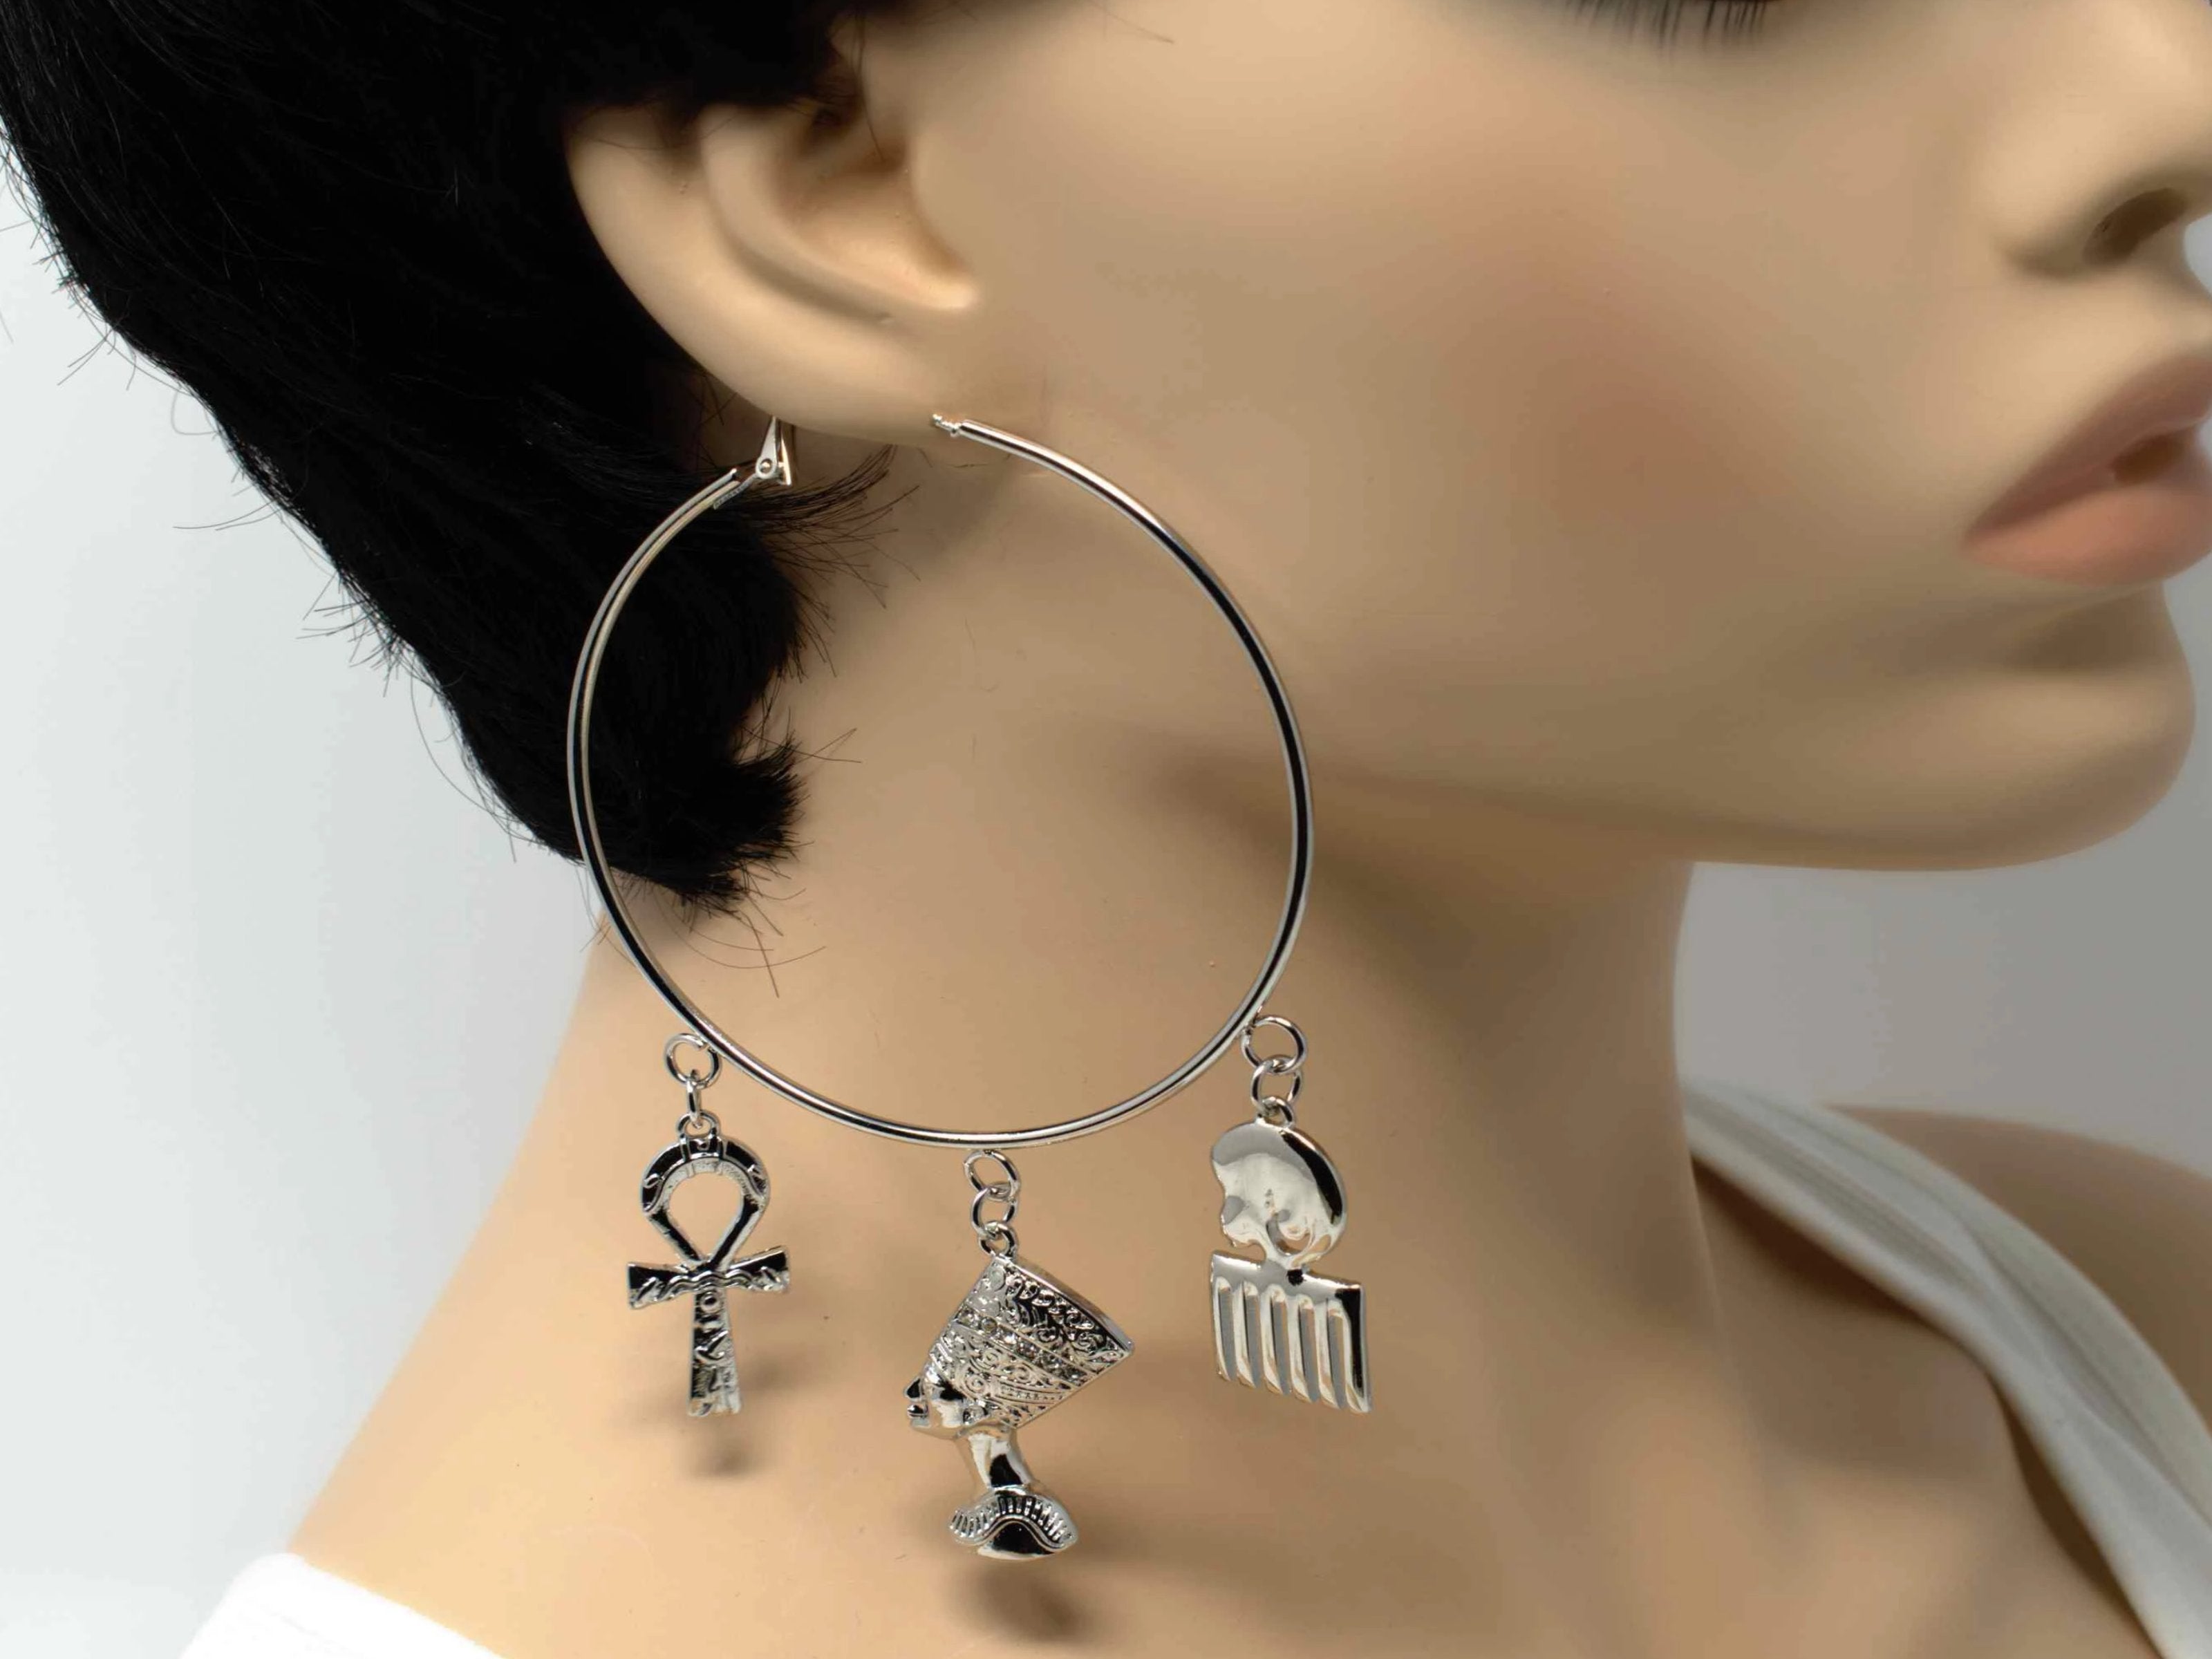 A radiant stylish afro chic silver hoop fashion earring with afro centric charms.